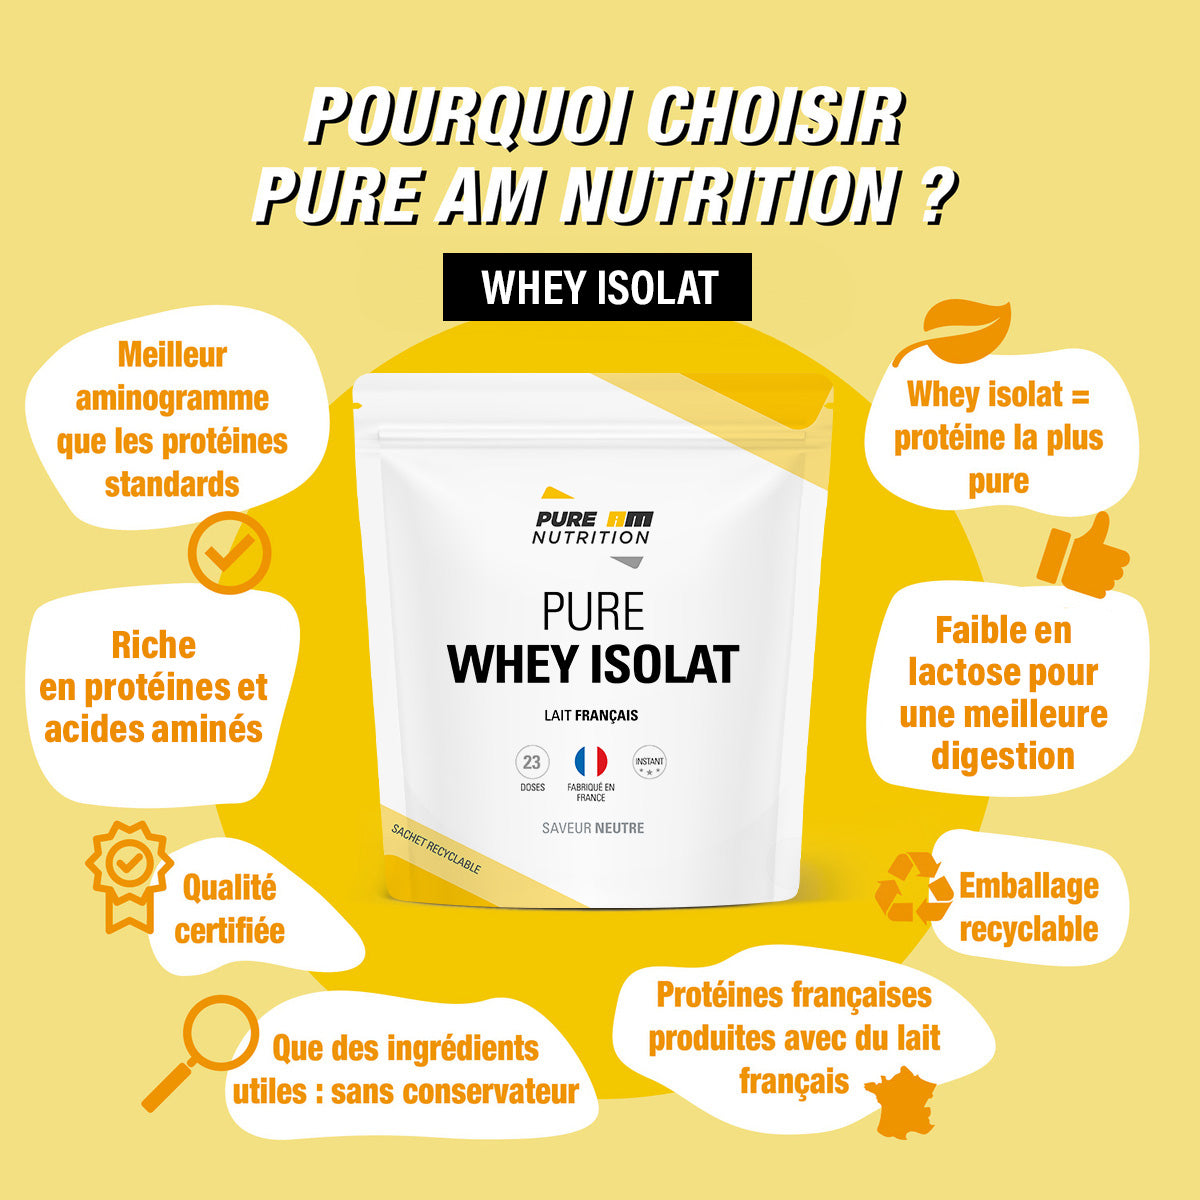 PURE Whey Isolate